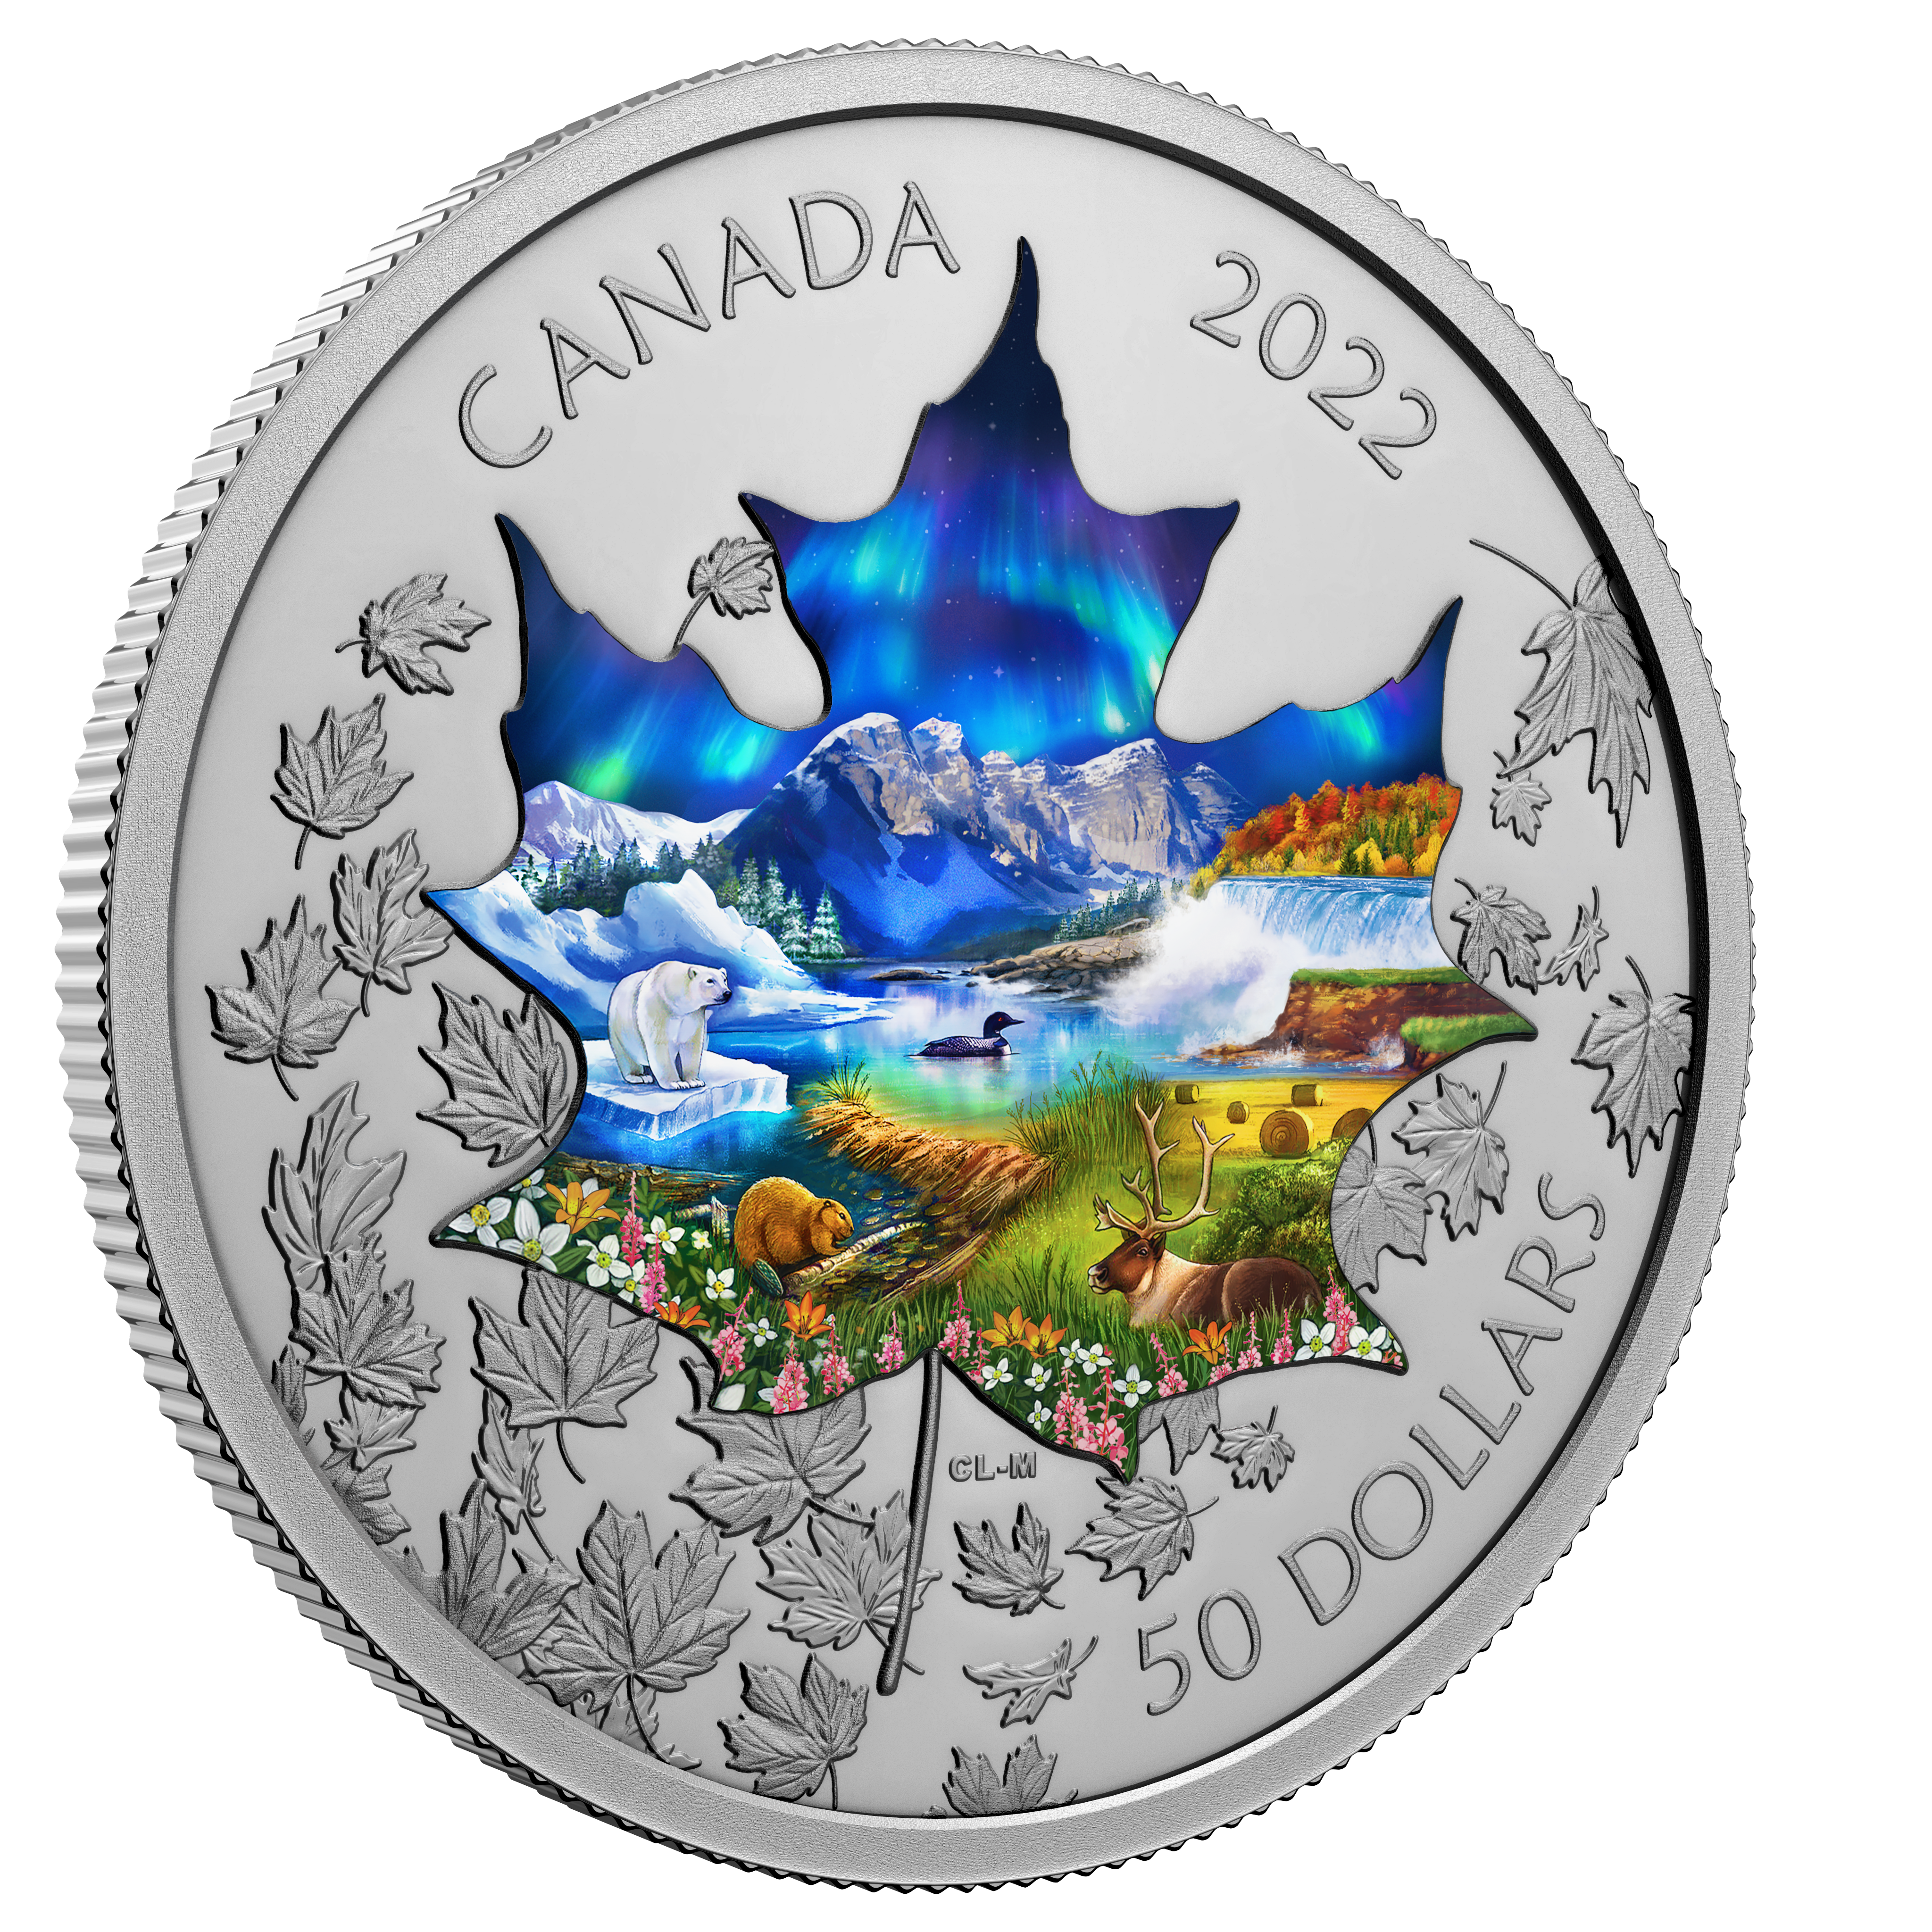 CANADIAN COLLAGE 3 Oz Silver Coin $50 Canada 2022